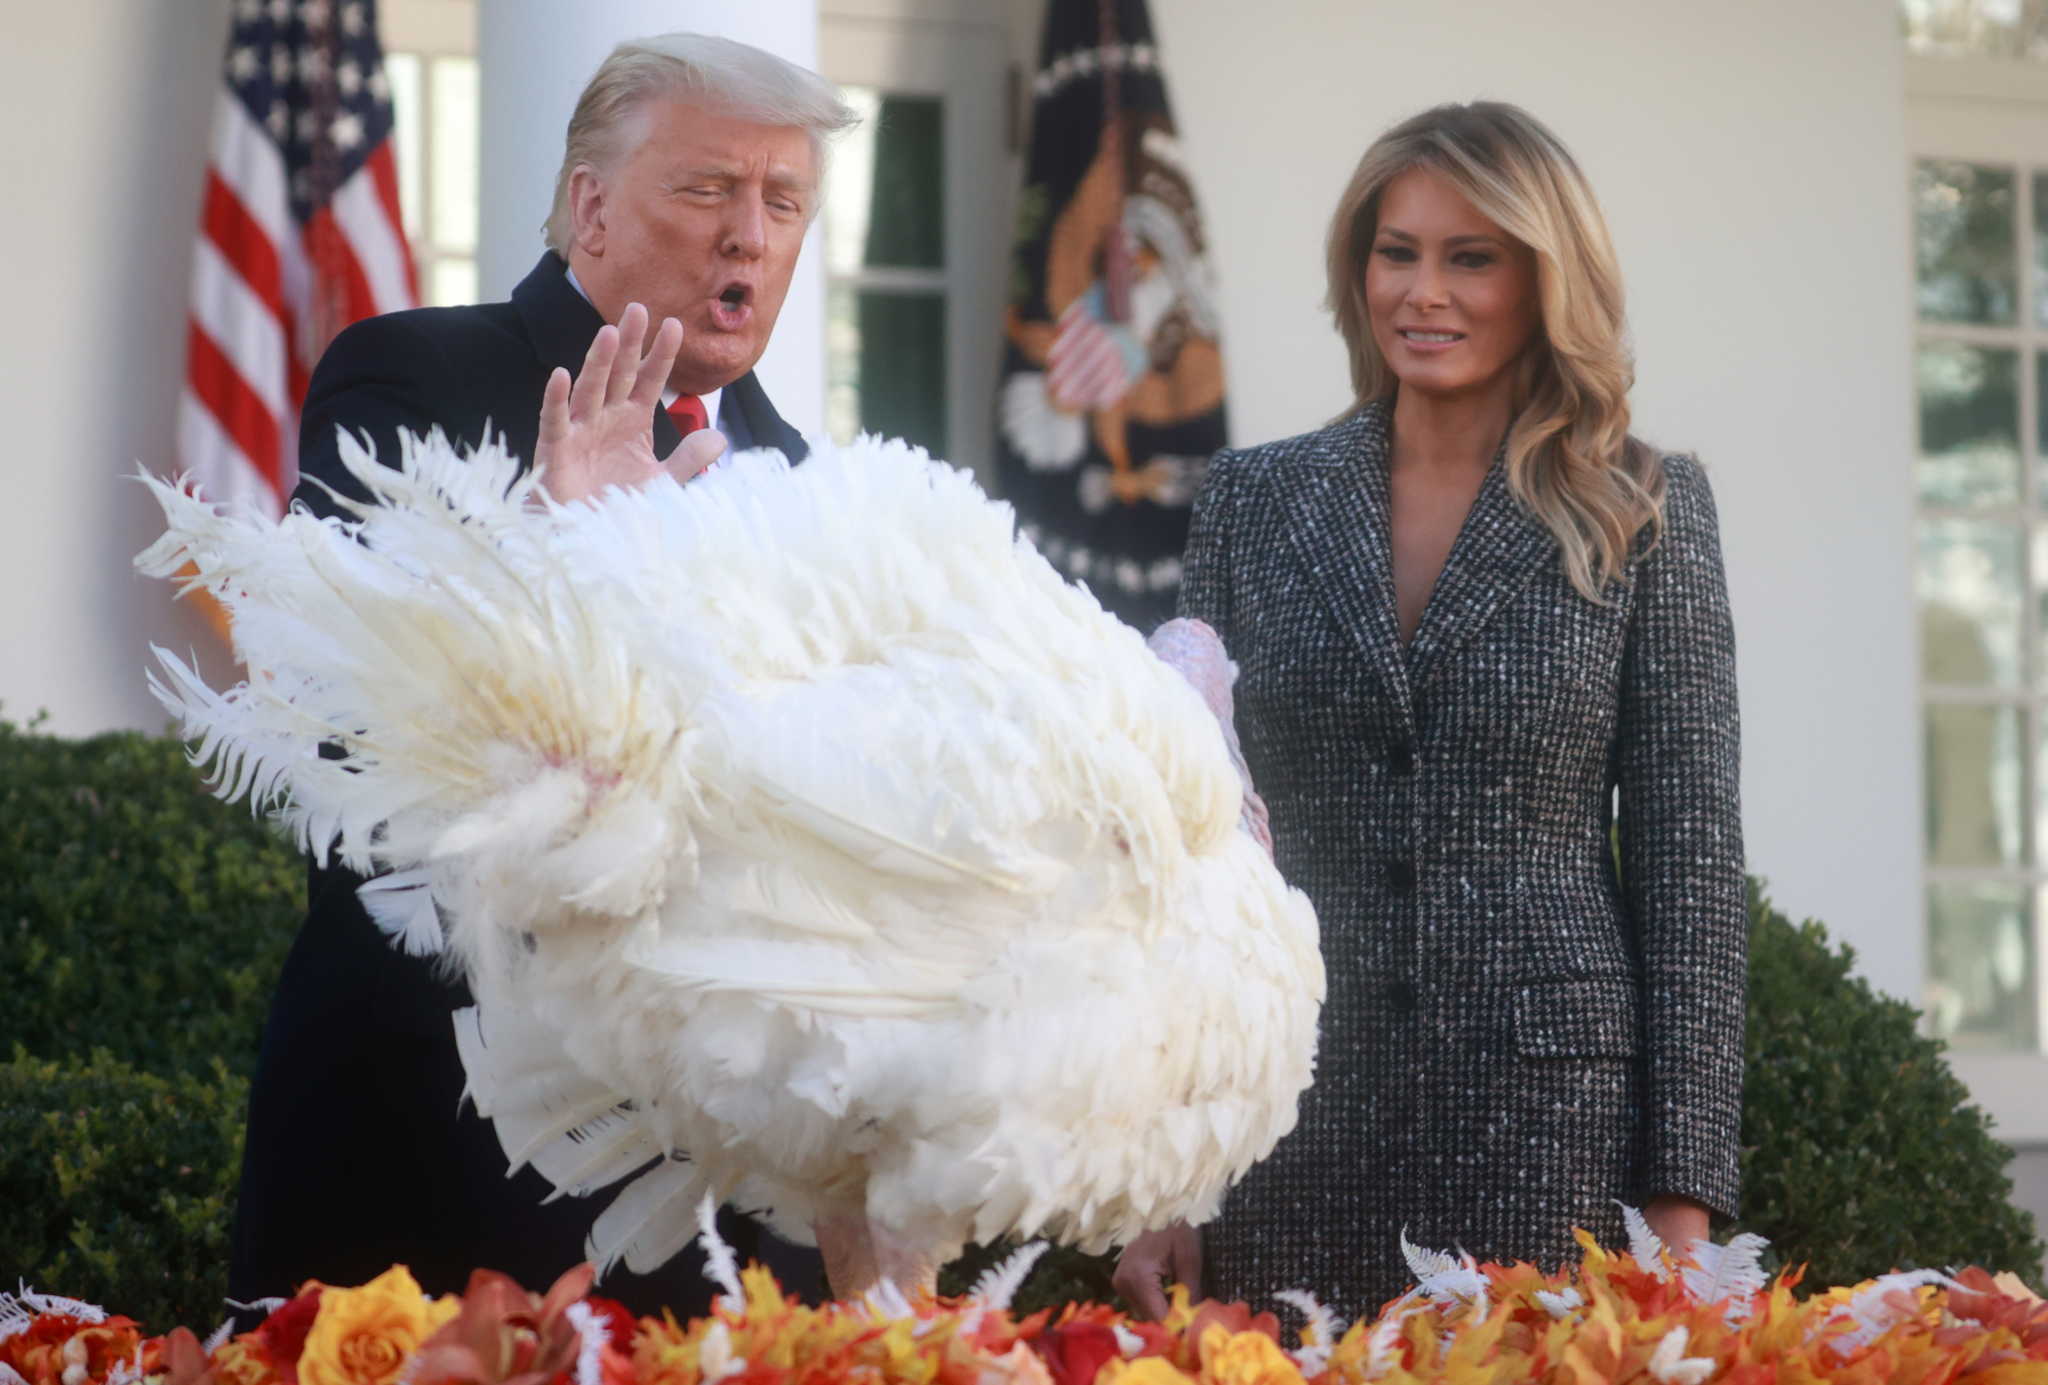 U.S. President Donald Trump stands with first lady Melania Trump as he pardons the National Thanksgiving Turkey "Corn" during the 73rd annual presentation in the Rose Garden at the White House in Washington, U.S., November 24, 2020. REUTERS/Hannah McKay